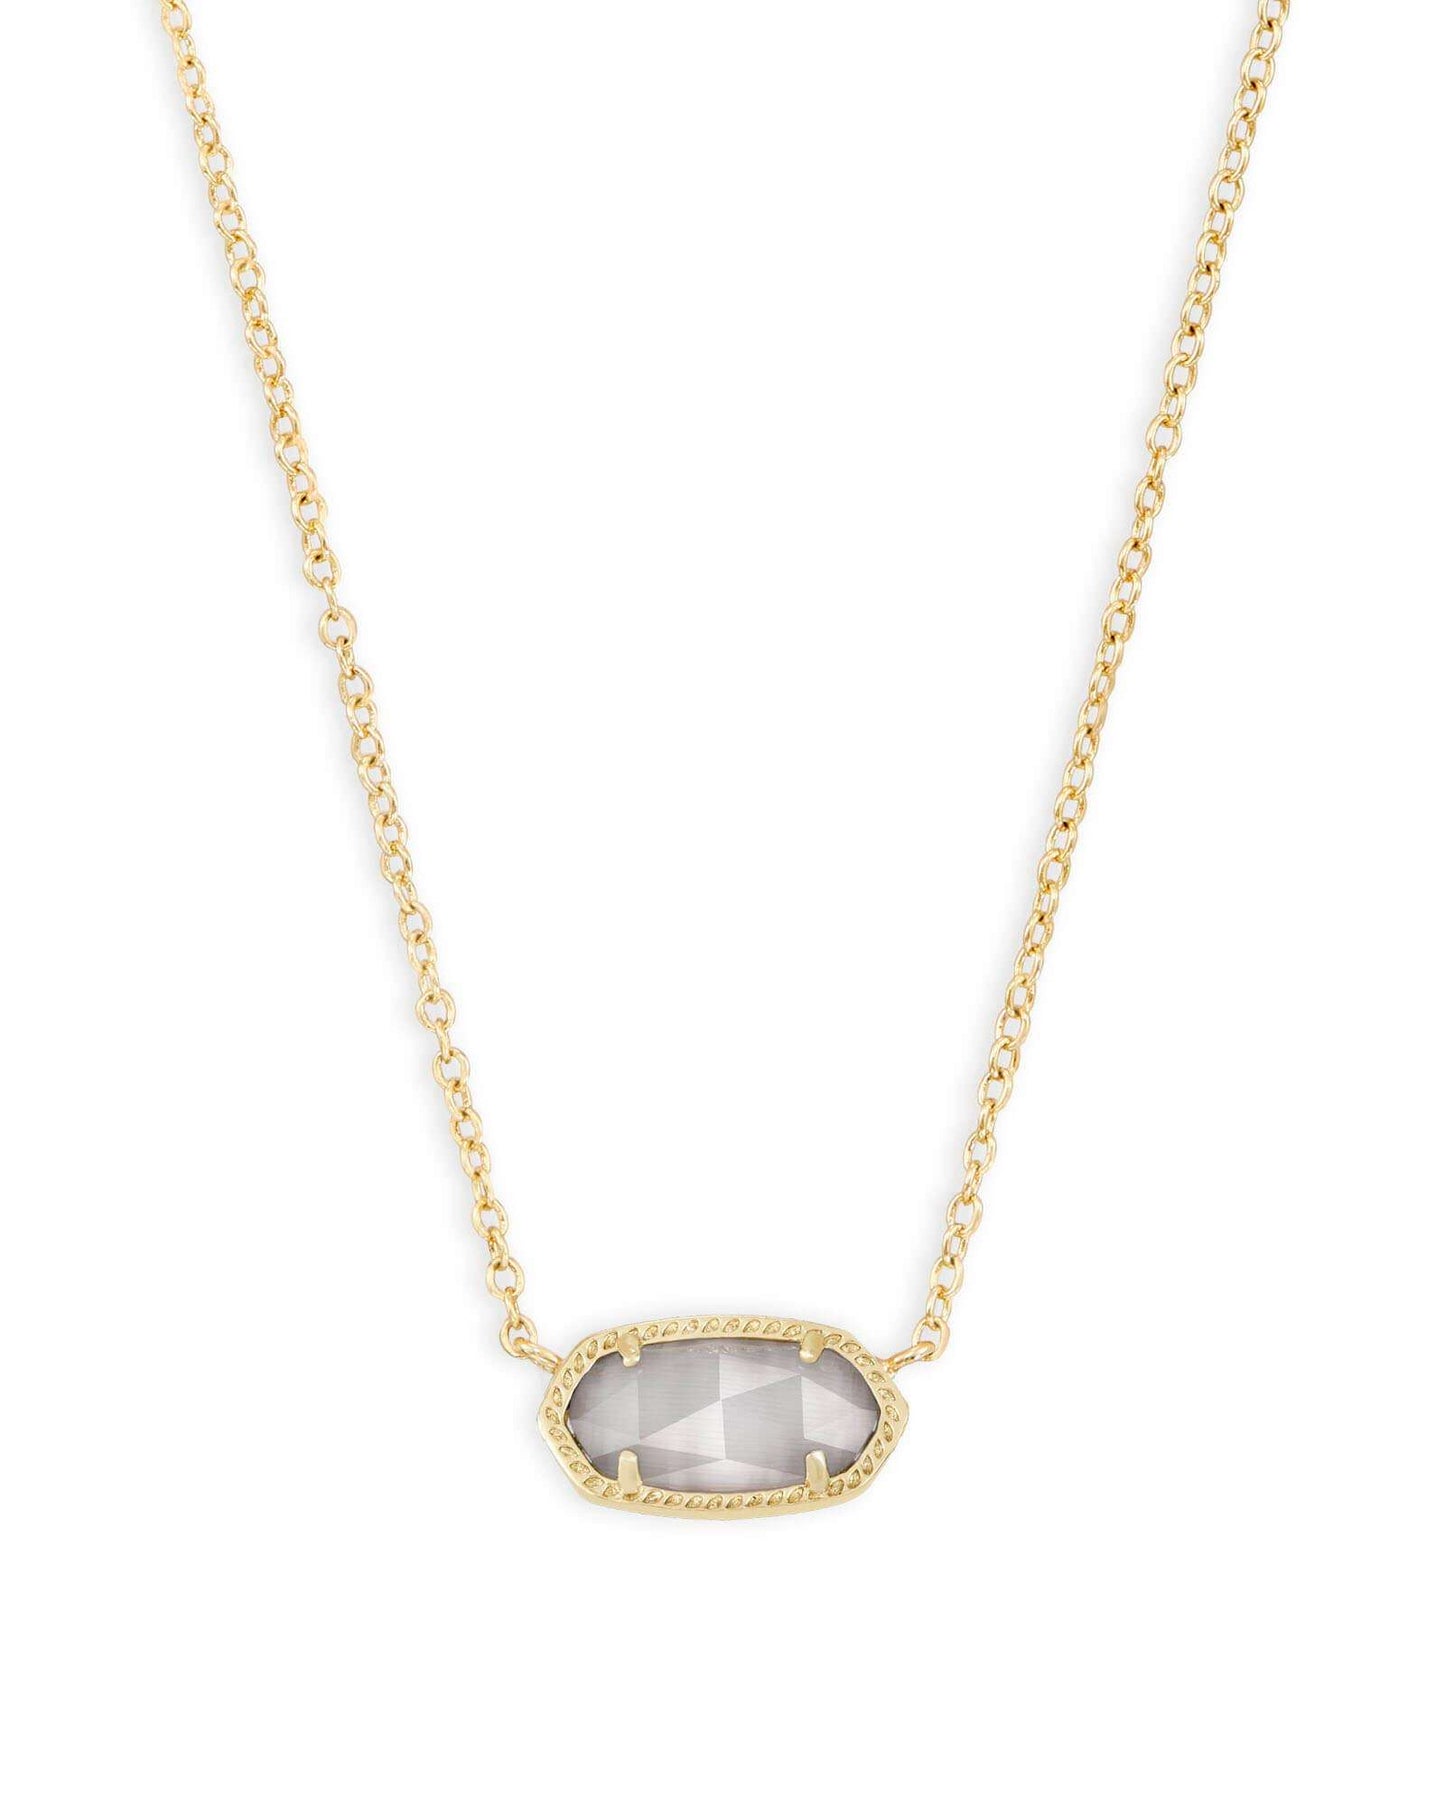 Elora 18k Gold-Plated Pendant Necklace.